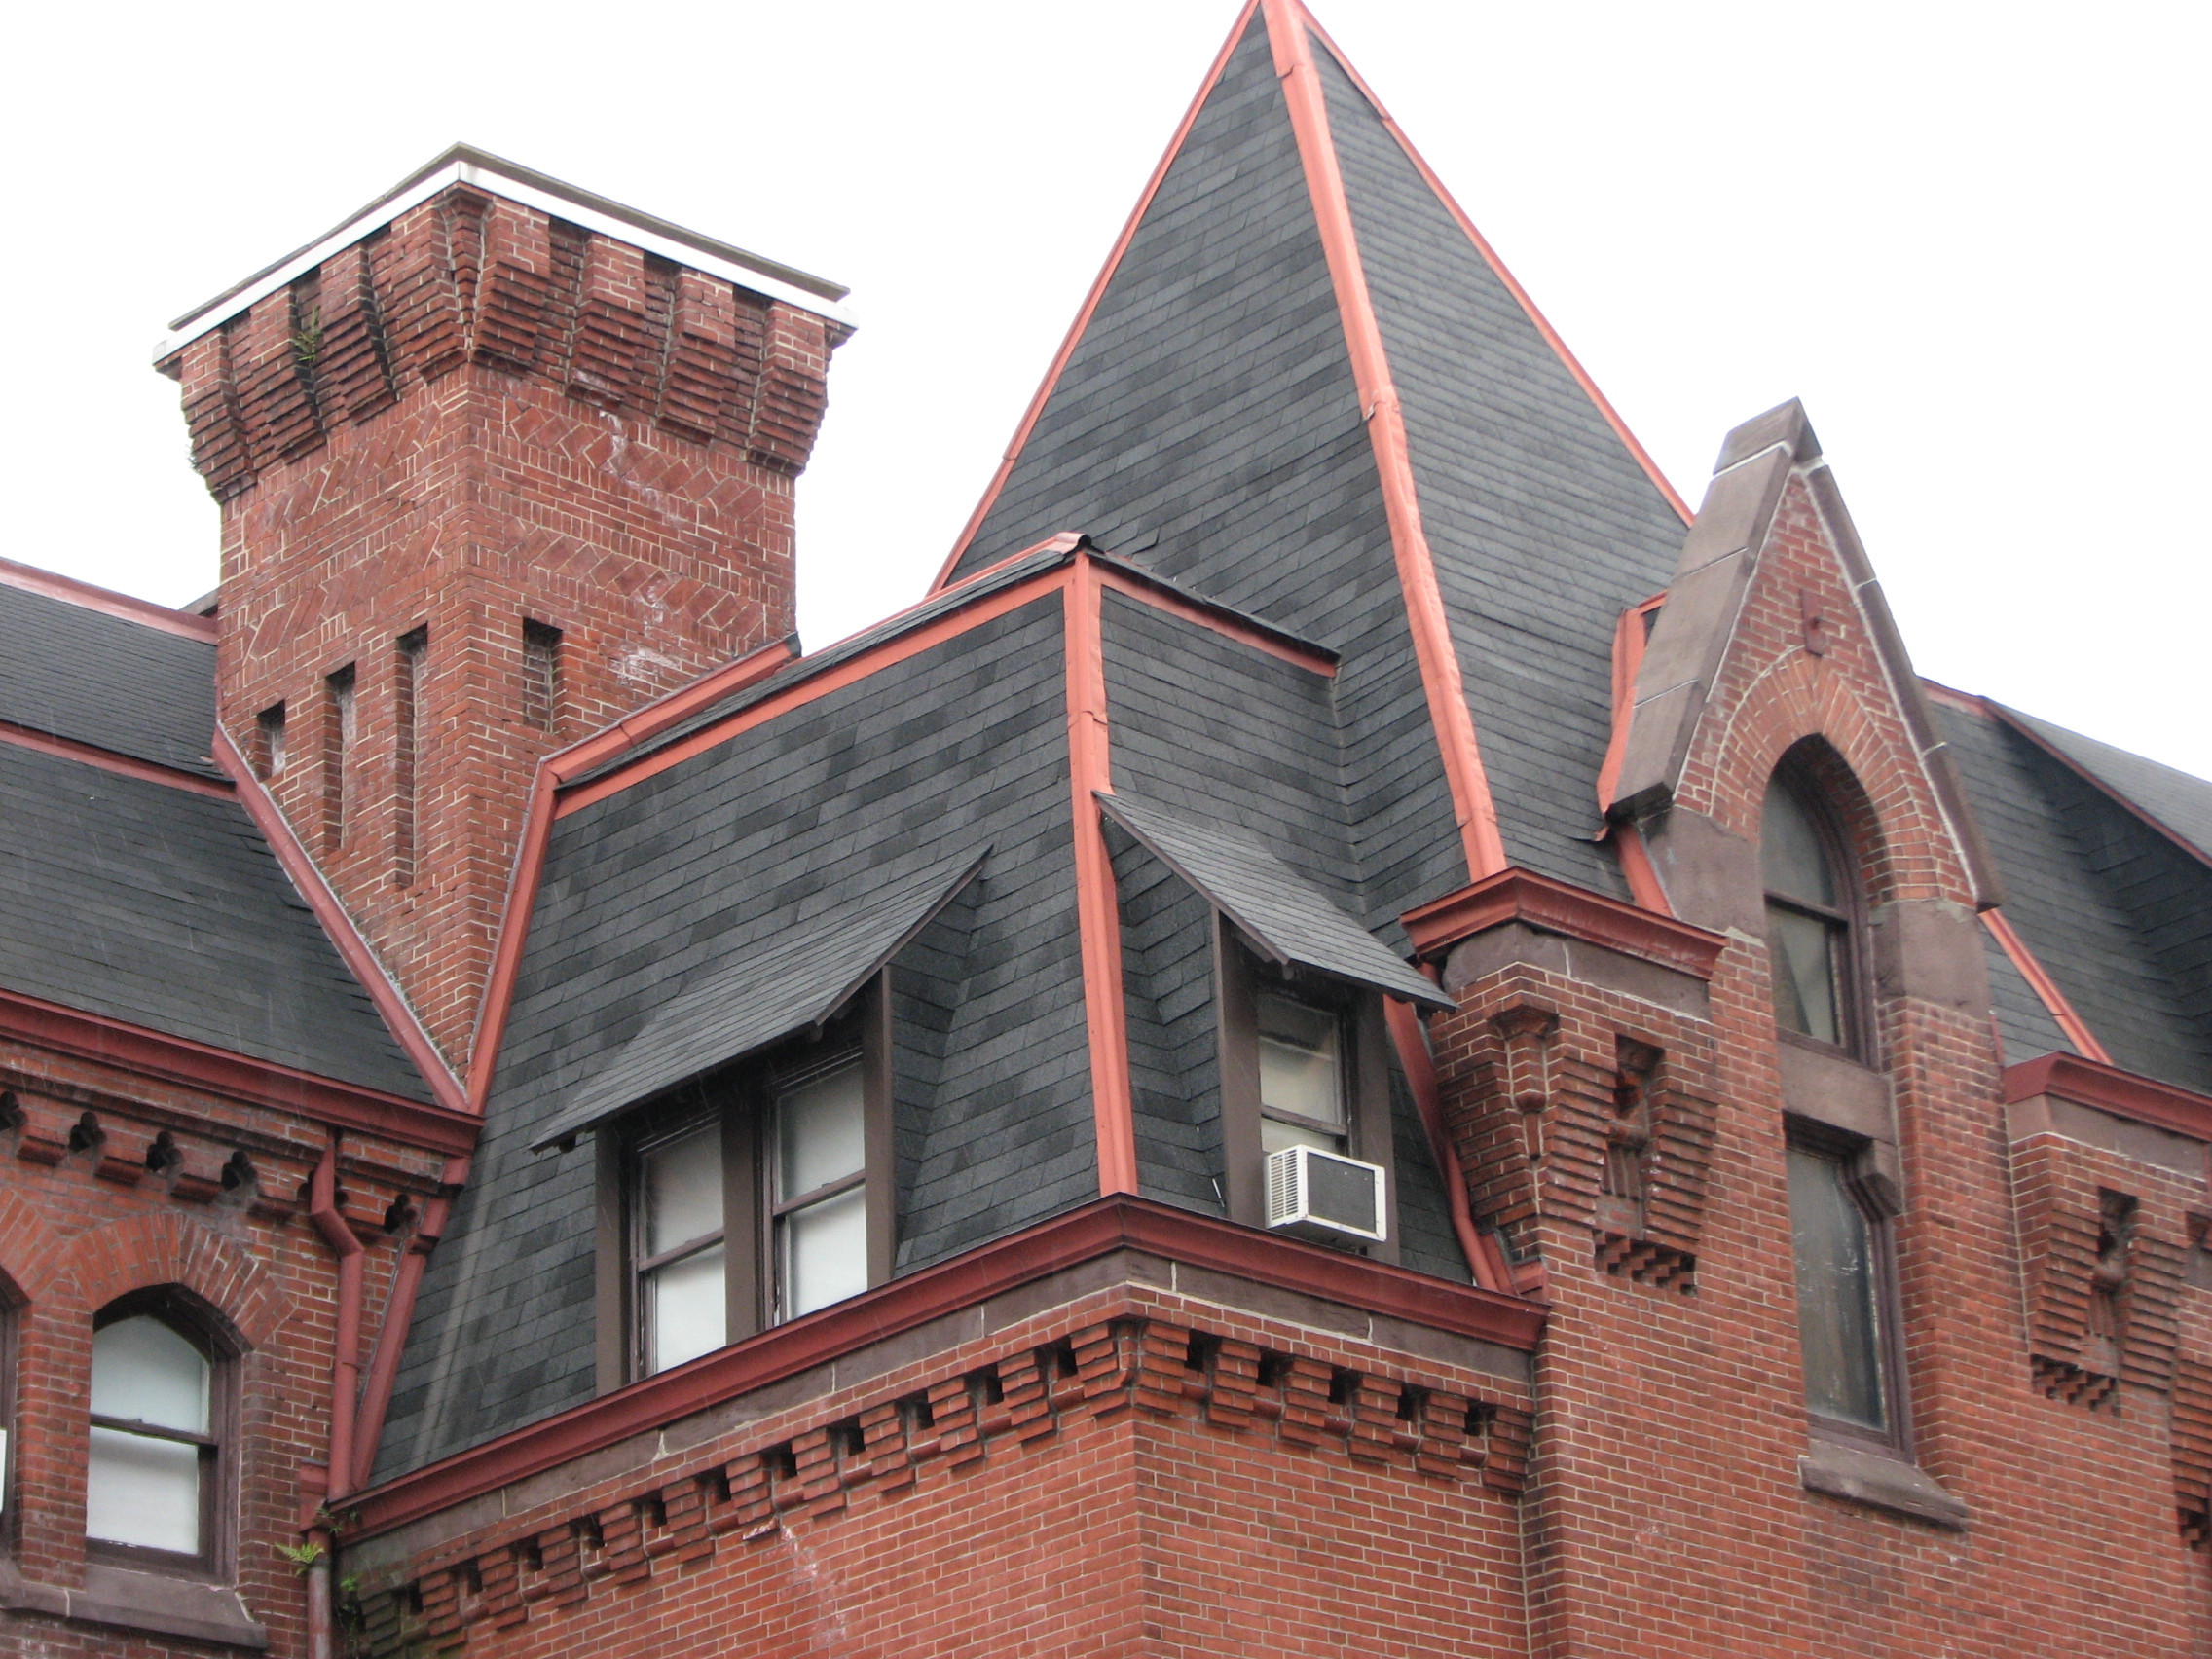 Pitched roofs, gables, dormers, and corbelled chimneys adorn the sections designed by Furness.